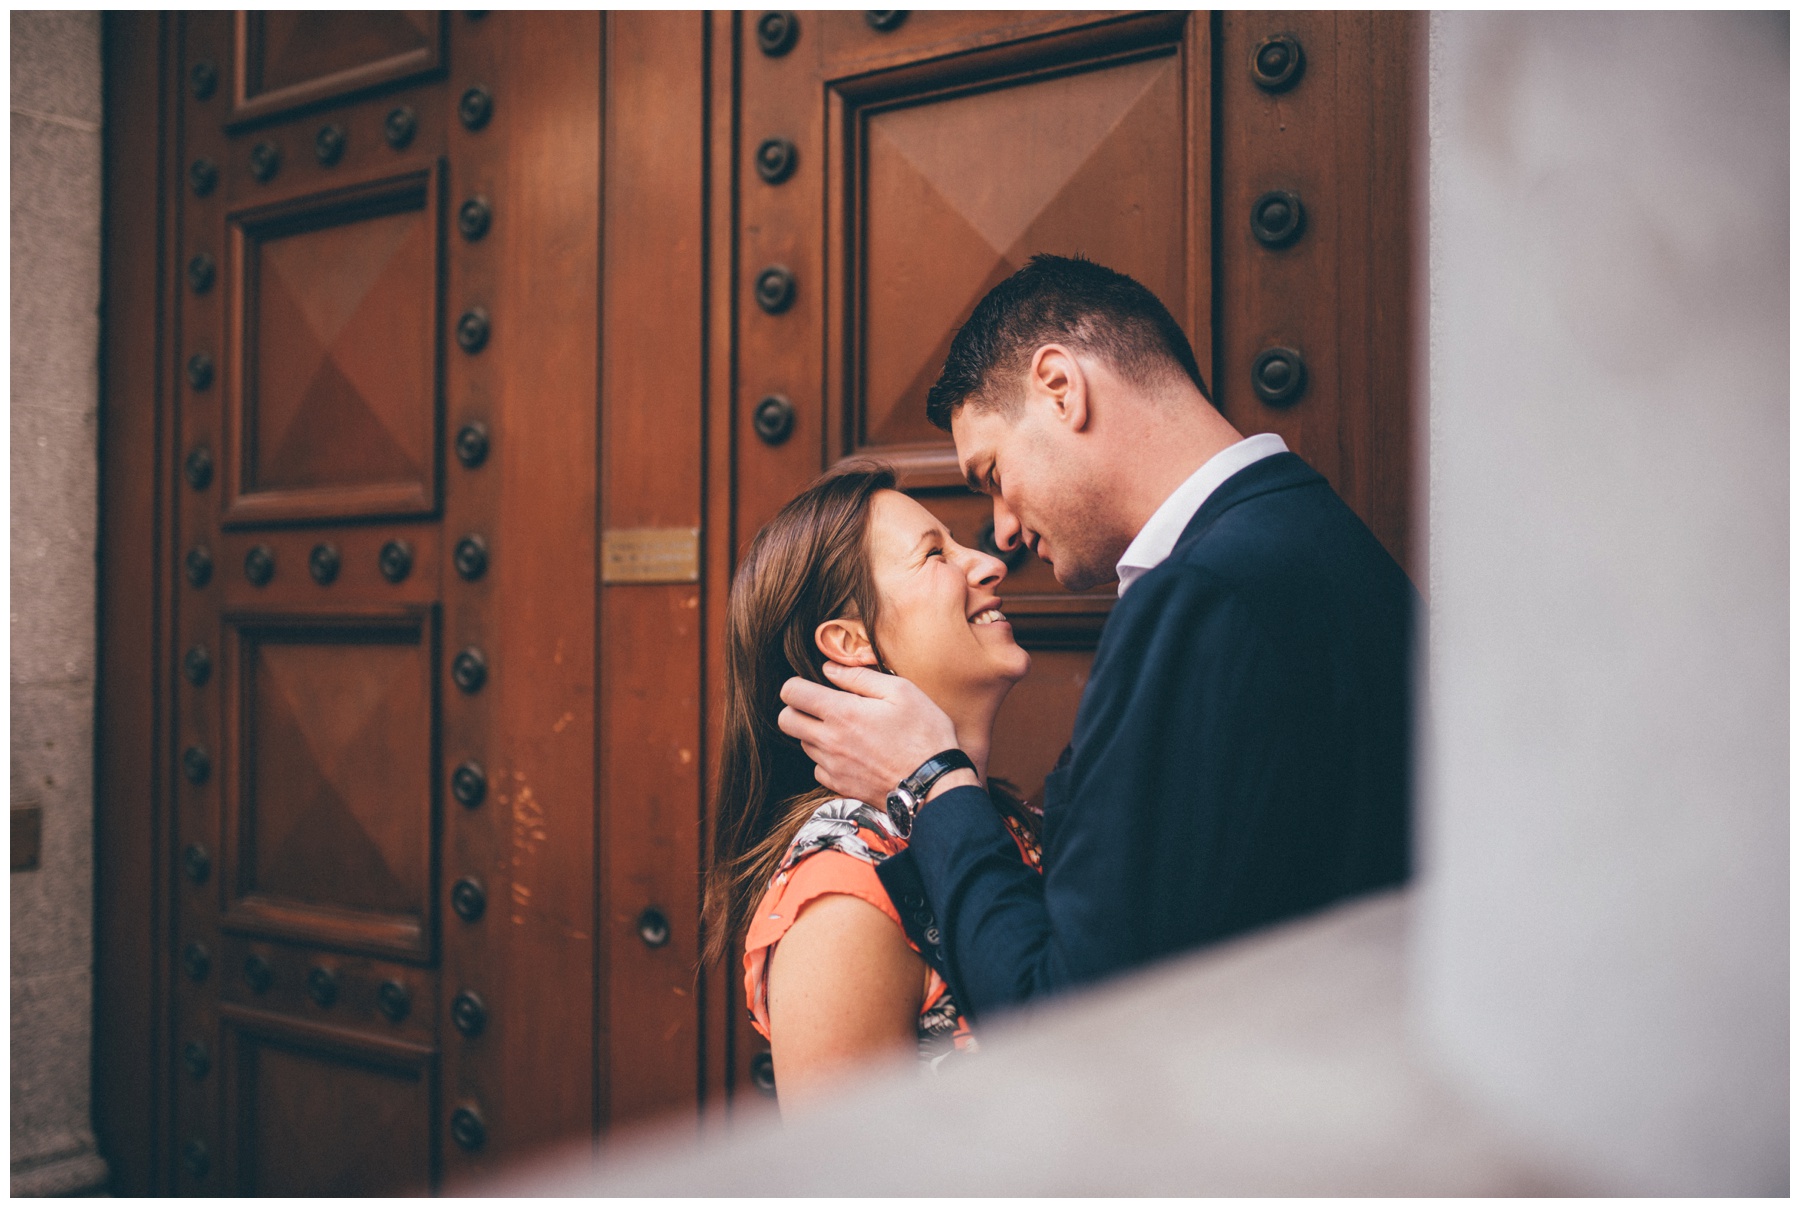 Couple kiss in a doorway during their engagement shoot in London city centre.